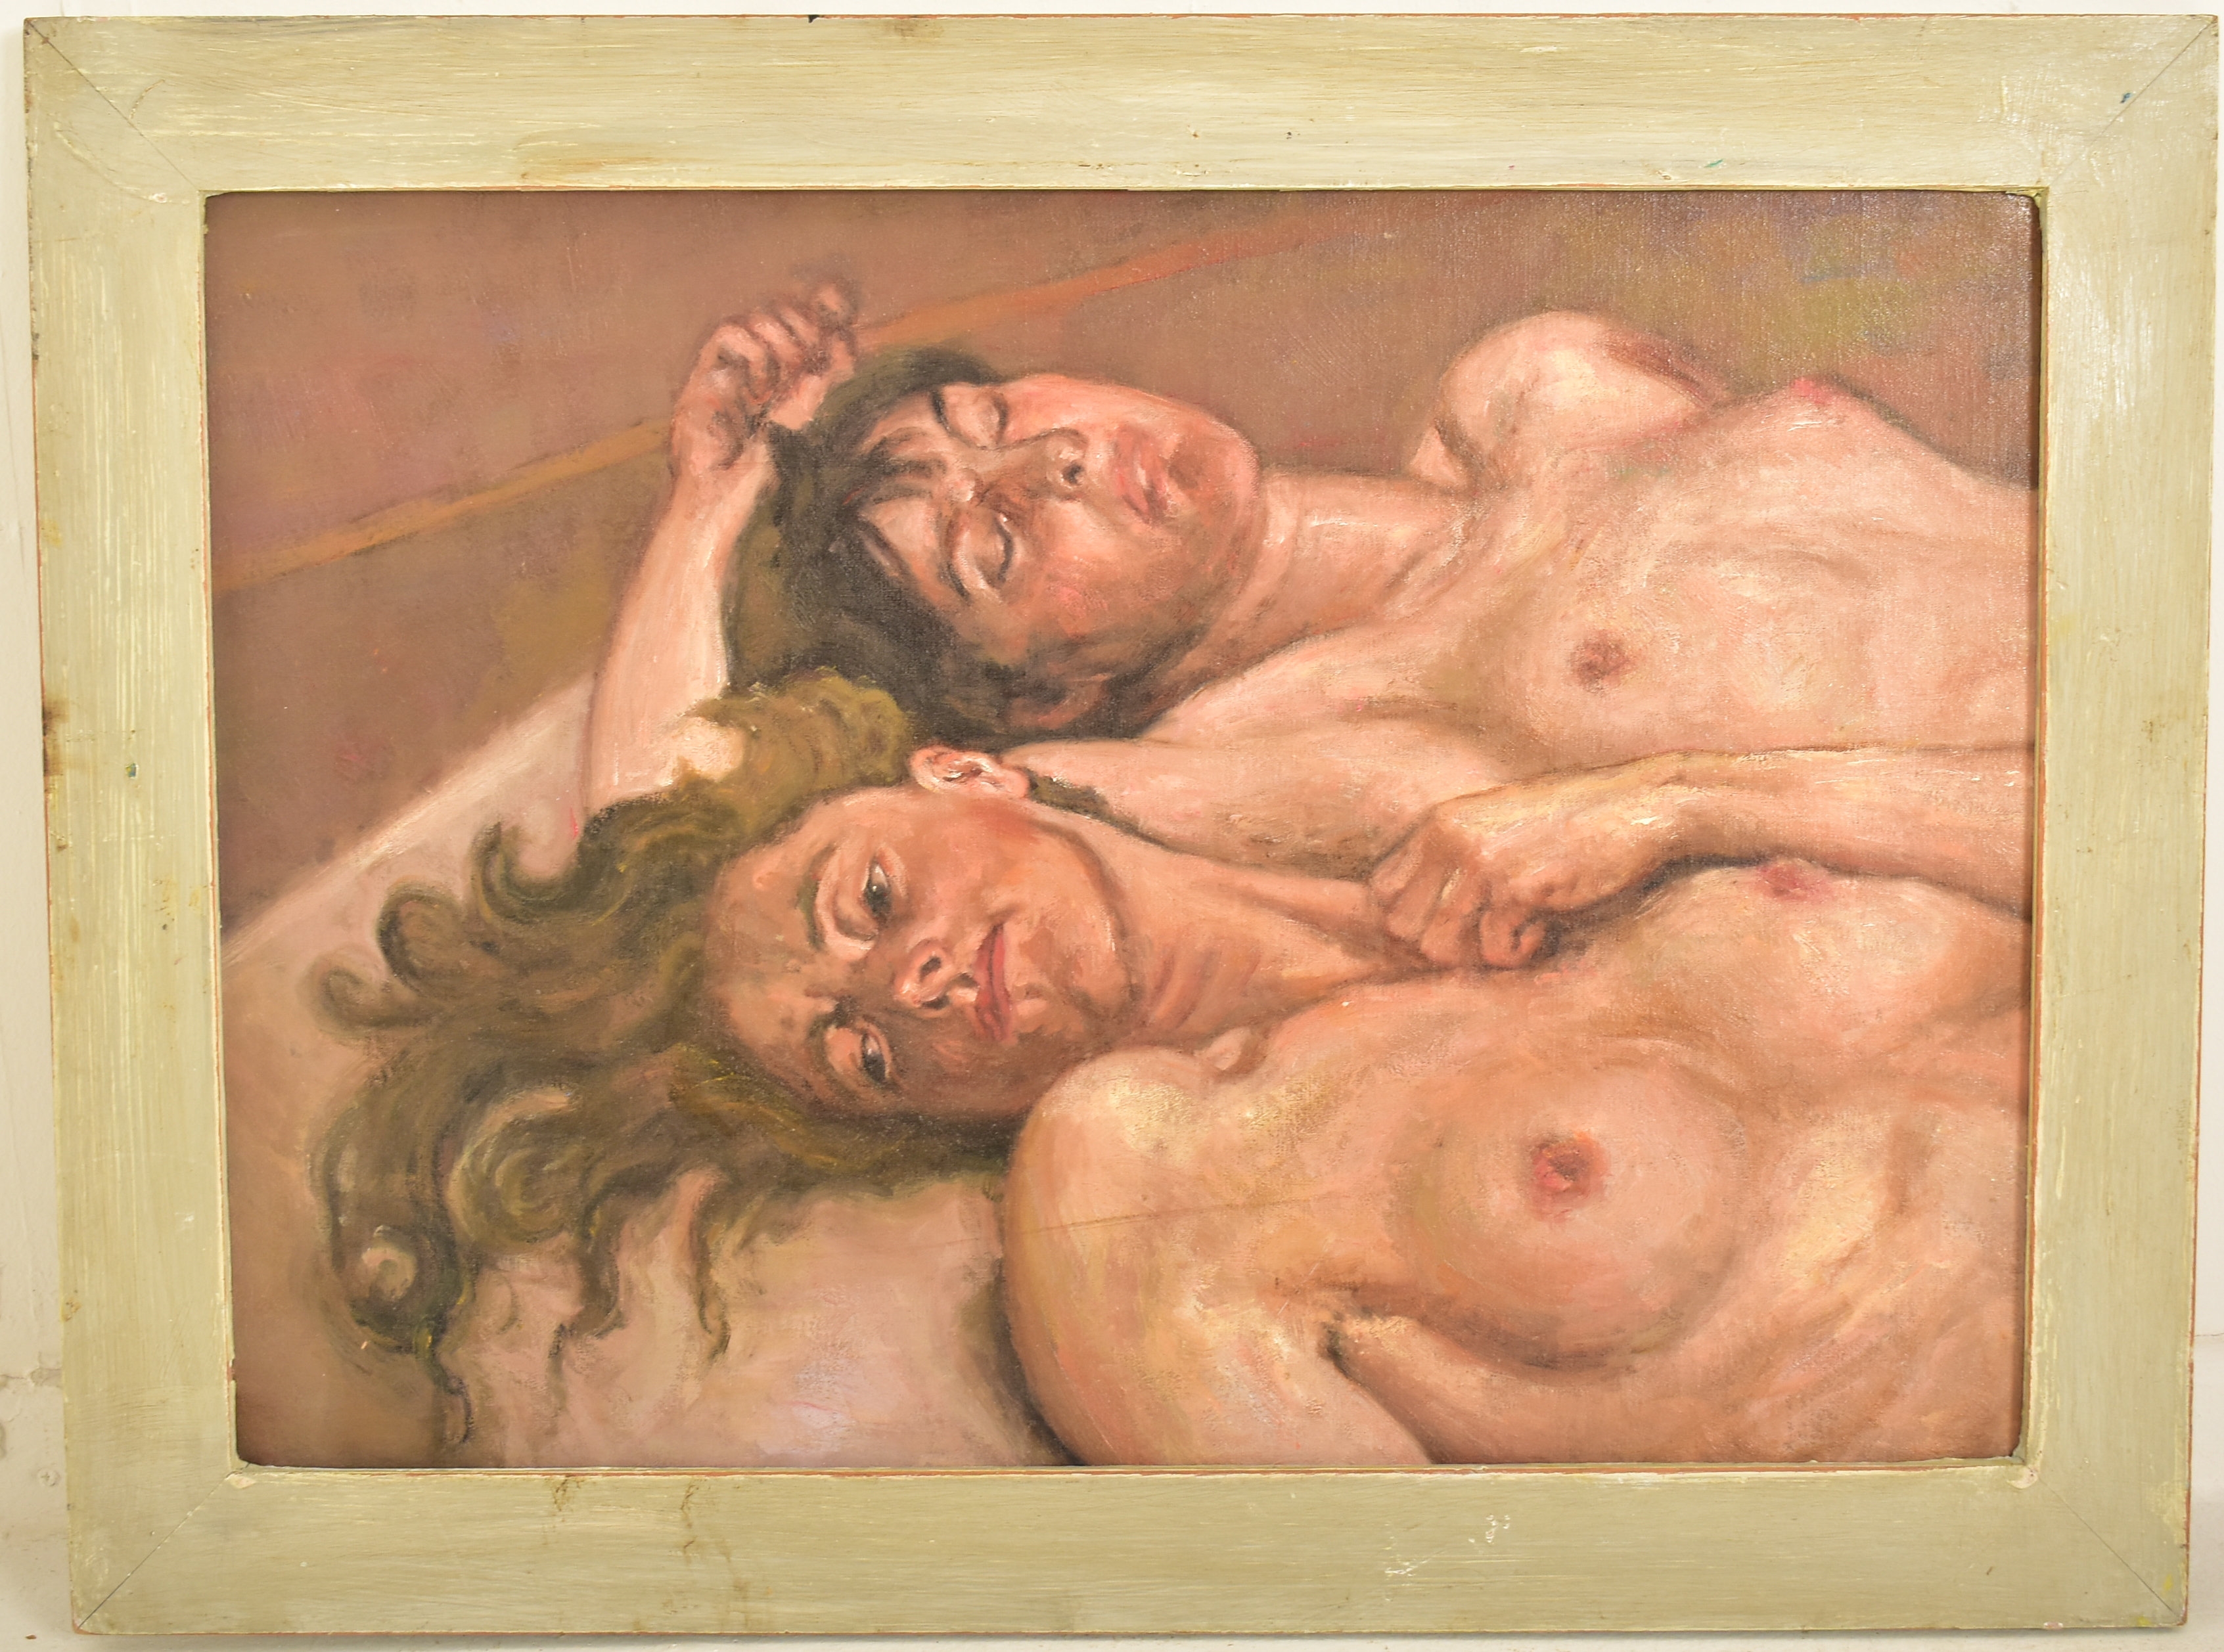 Artwork by Lucian Freud, MANNER OF LUCIAN FREUD - OIL ON BOARD NUDE STUDY PAINTING, Made of original oil on canvas board